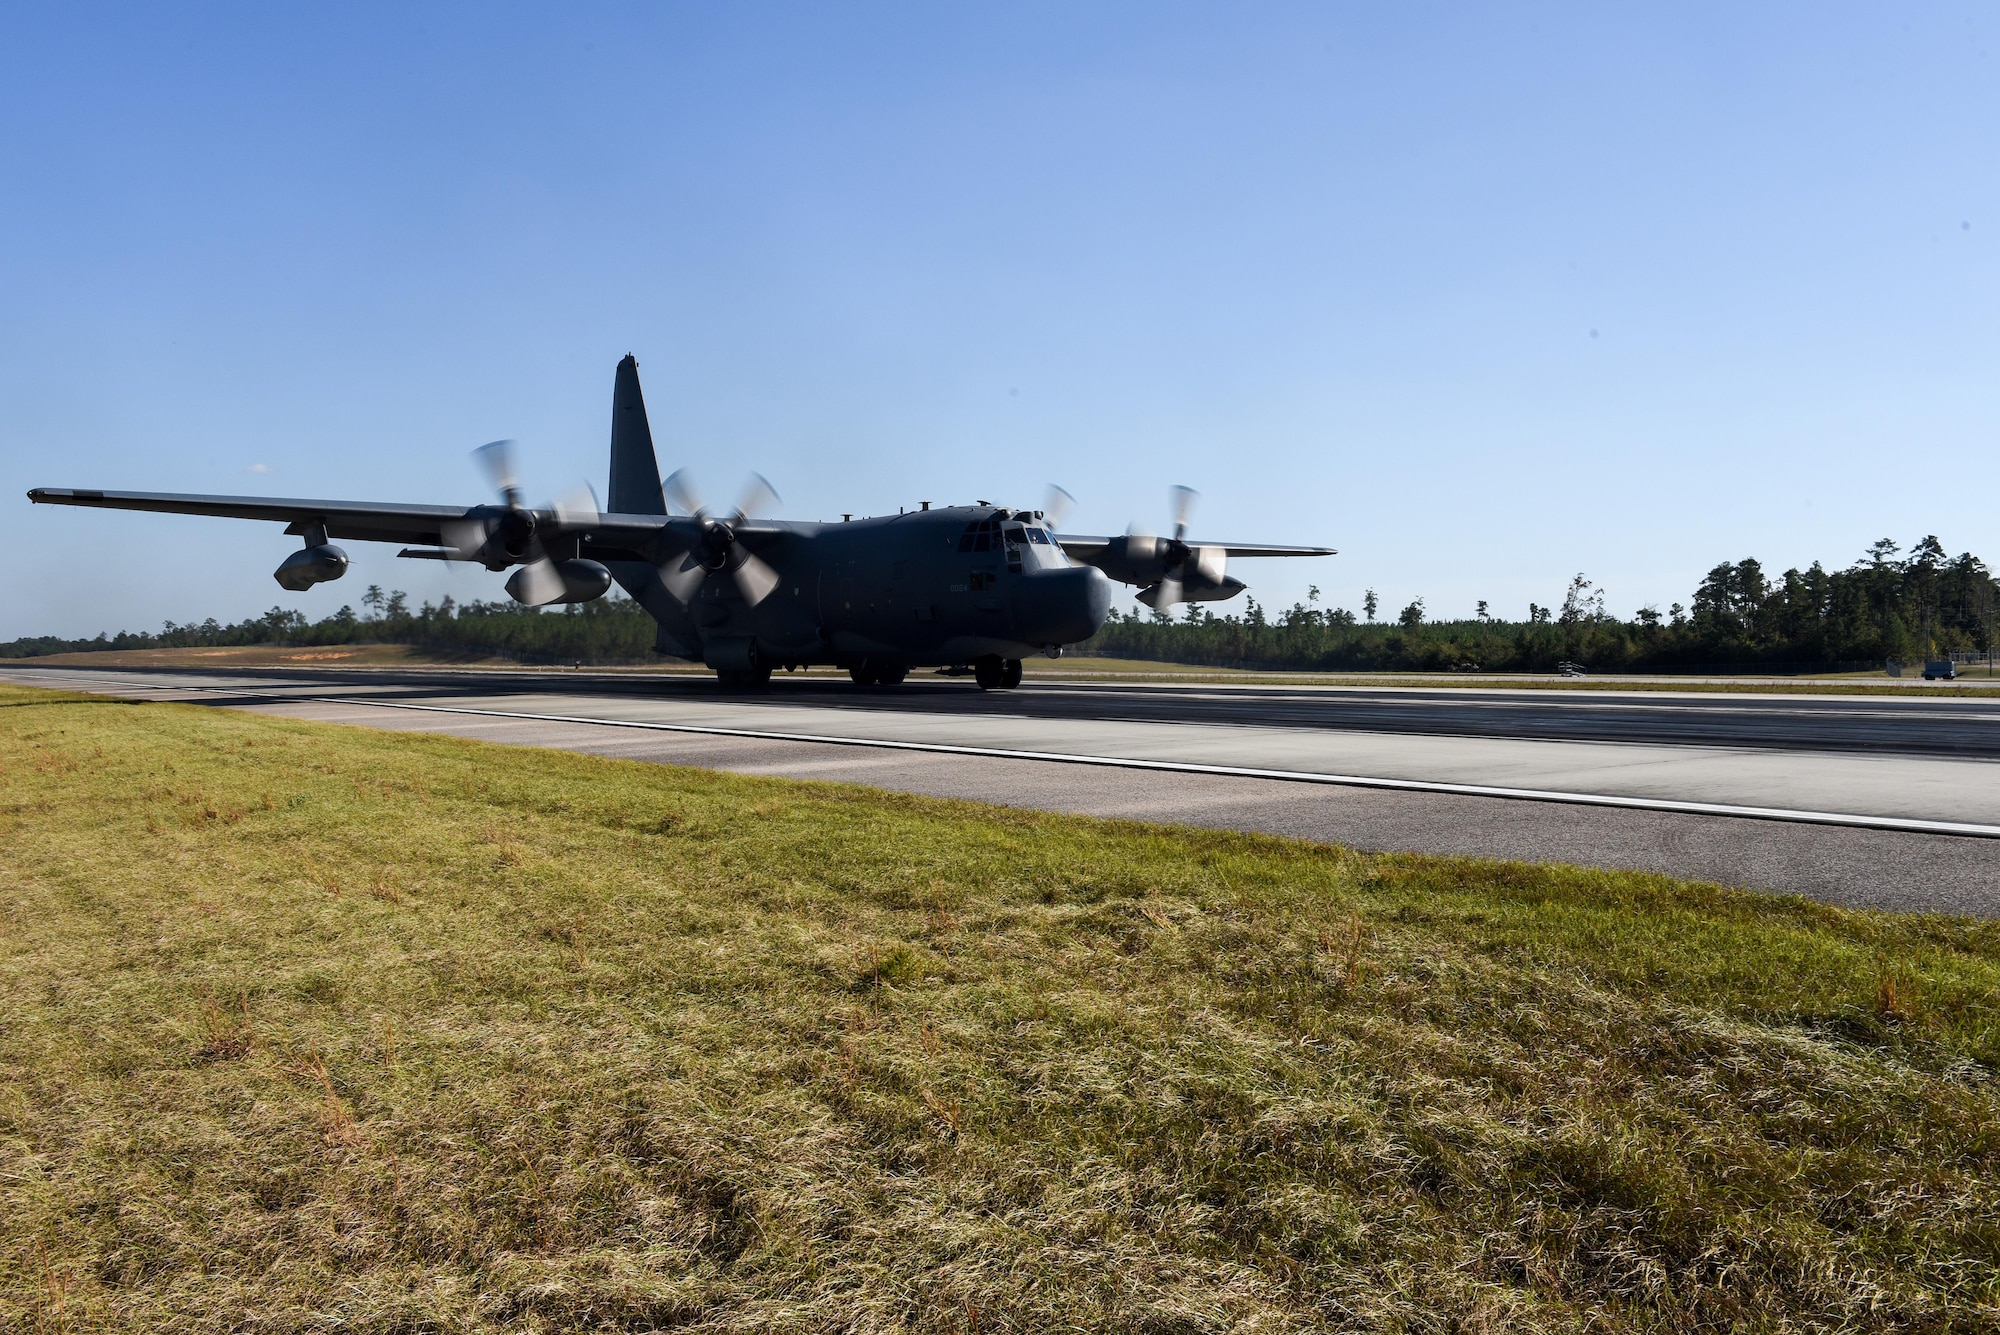 An MC-130H Combat Talon II lands during Task Force Exercise Southern Strike at Camp Shelby, Miss., Oct. 29, 2016. The 1st Special Operations Wing provided air support to Joint Special Operations Forces during Southern Strike. (U.S. Air Force photo by Senior Airman Jeff Parkinson)